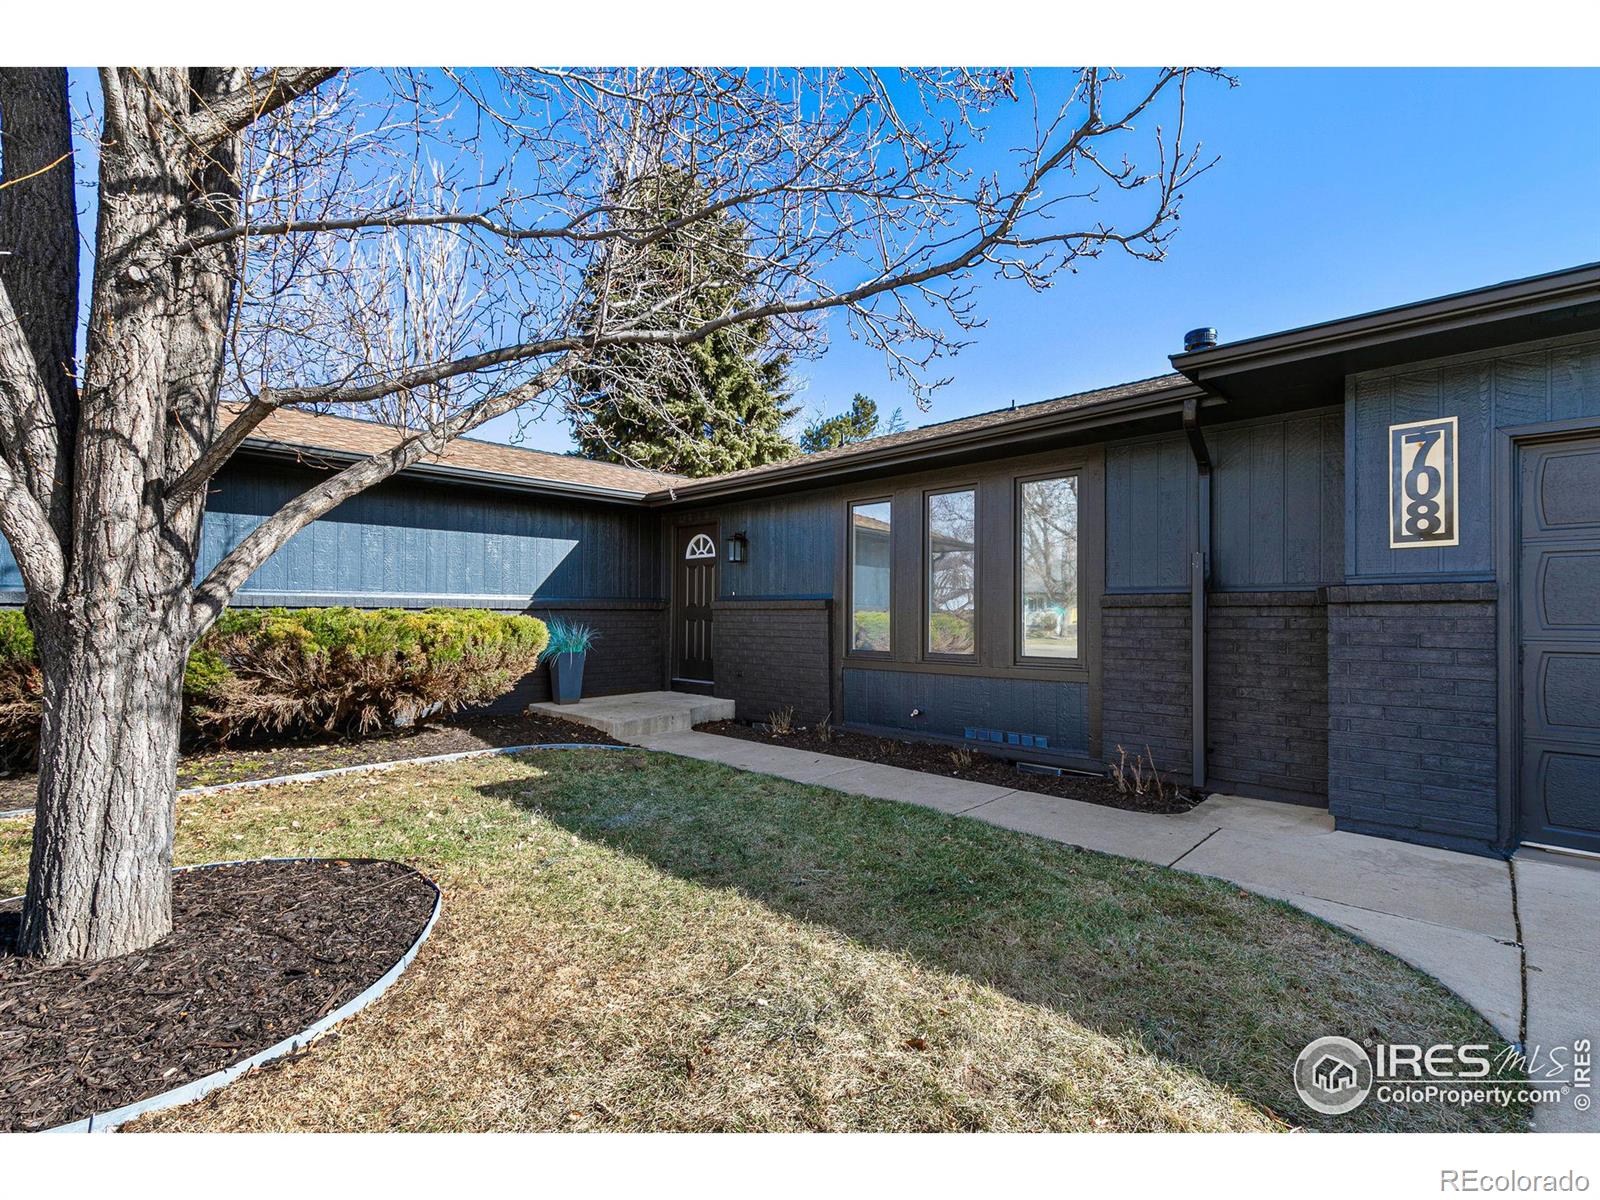 708  Parkview Drive, fort collins MLS: 4567891004042 Beds: 3 Baths: 2 Price: $688,000